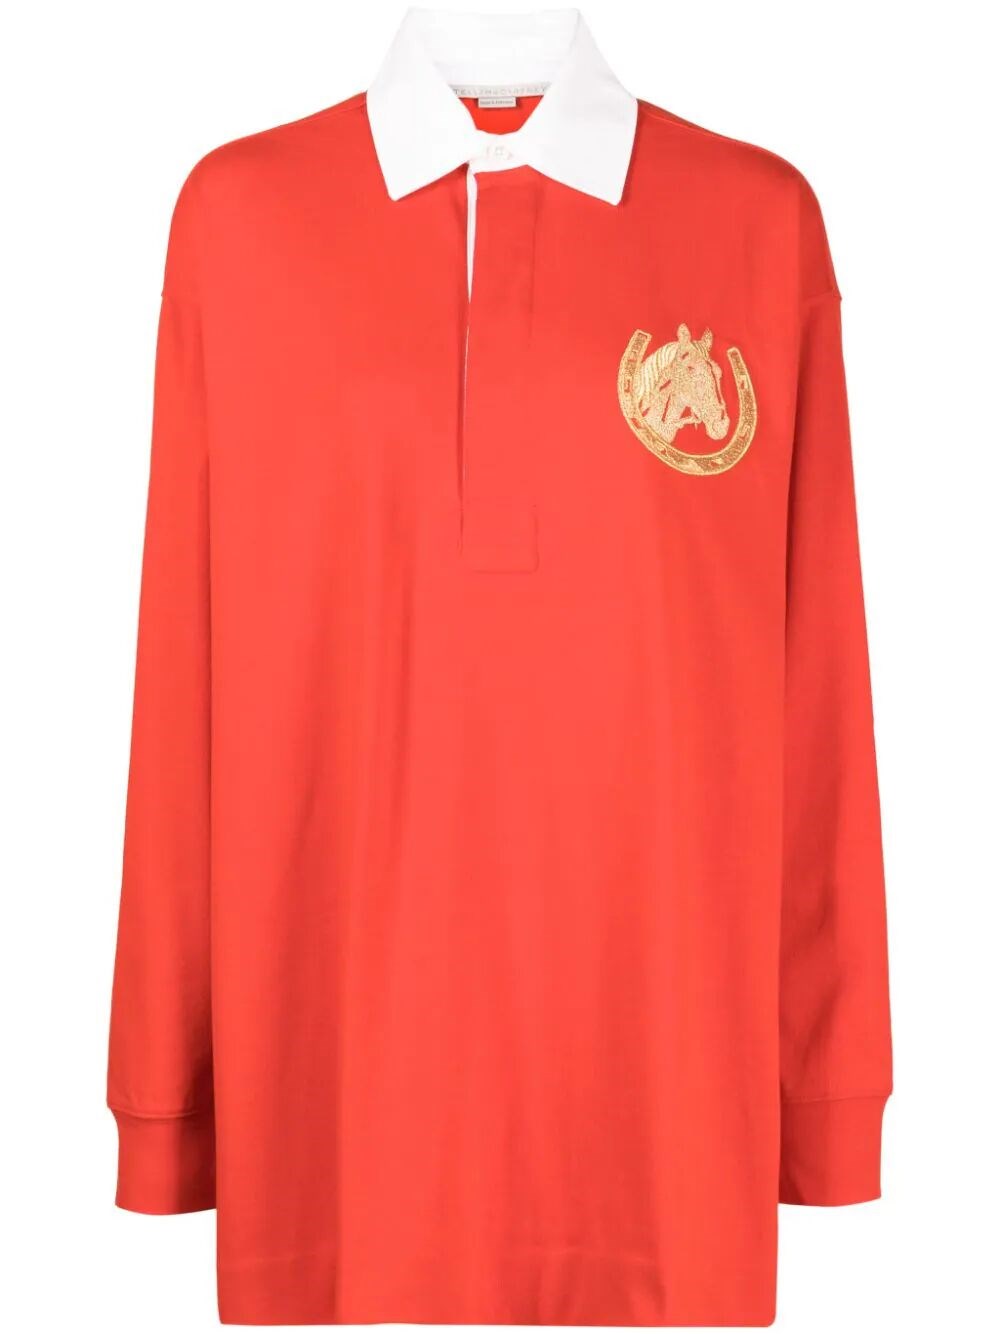 STELLA MCCARTNEY RUGBY SHIRT WITH PONY CLUB EMBROIDERY